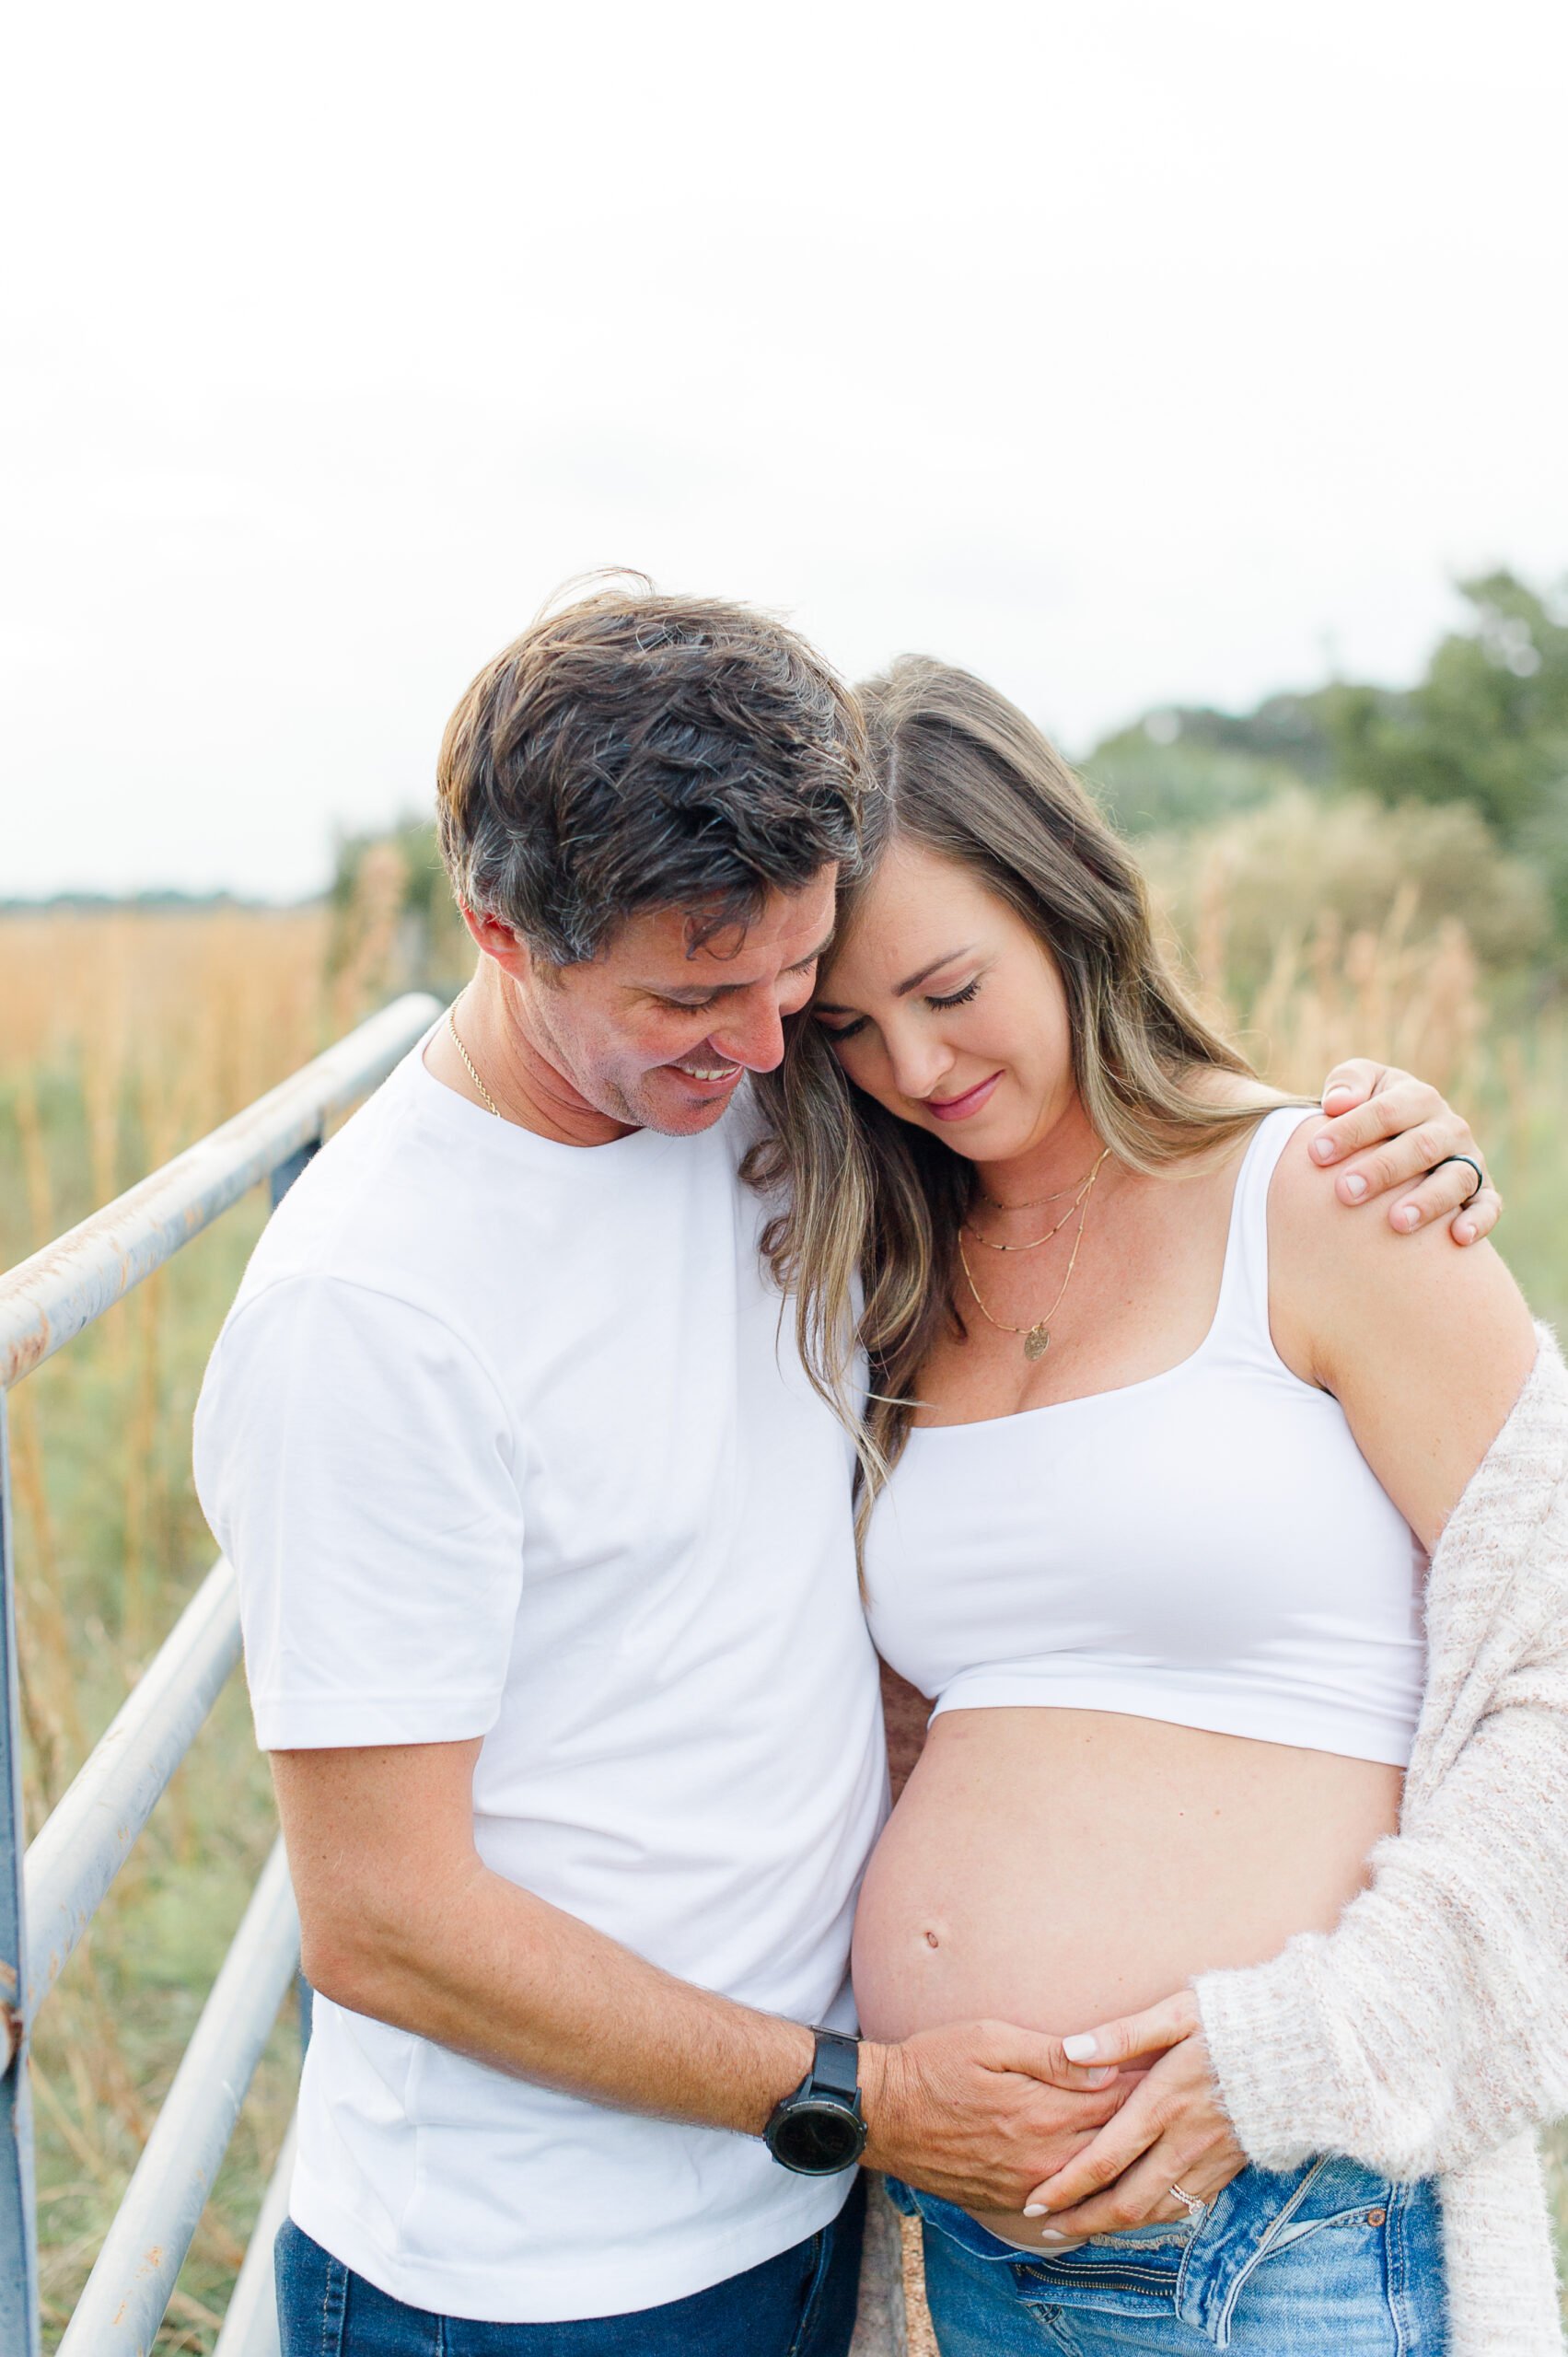 New parents hugging while holding moms pregnant belly in a tall grass field